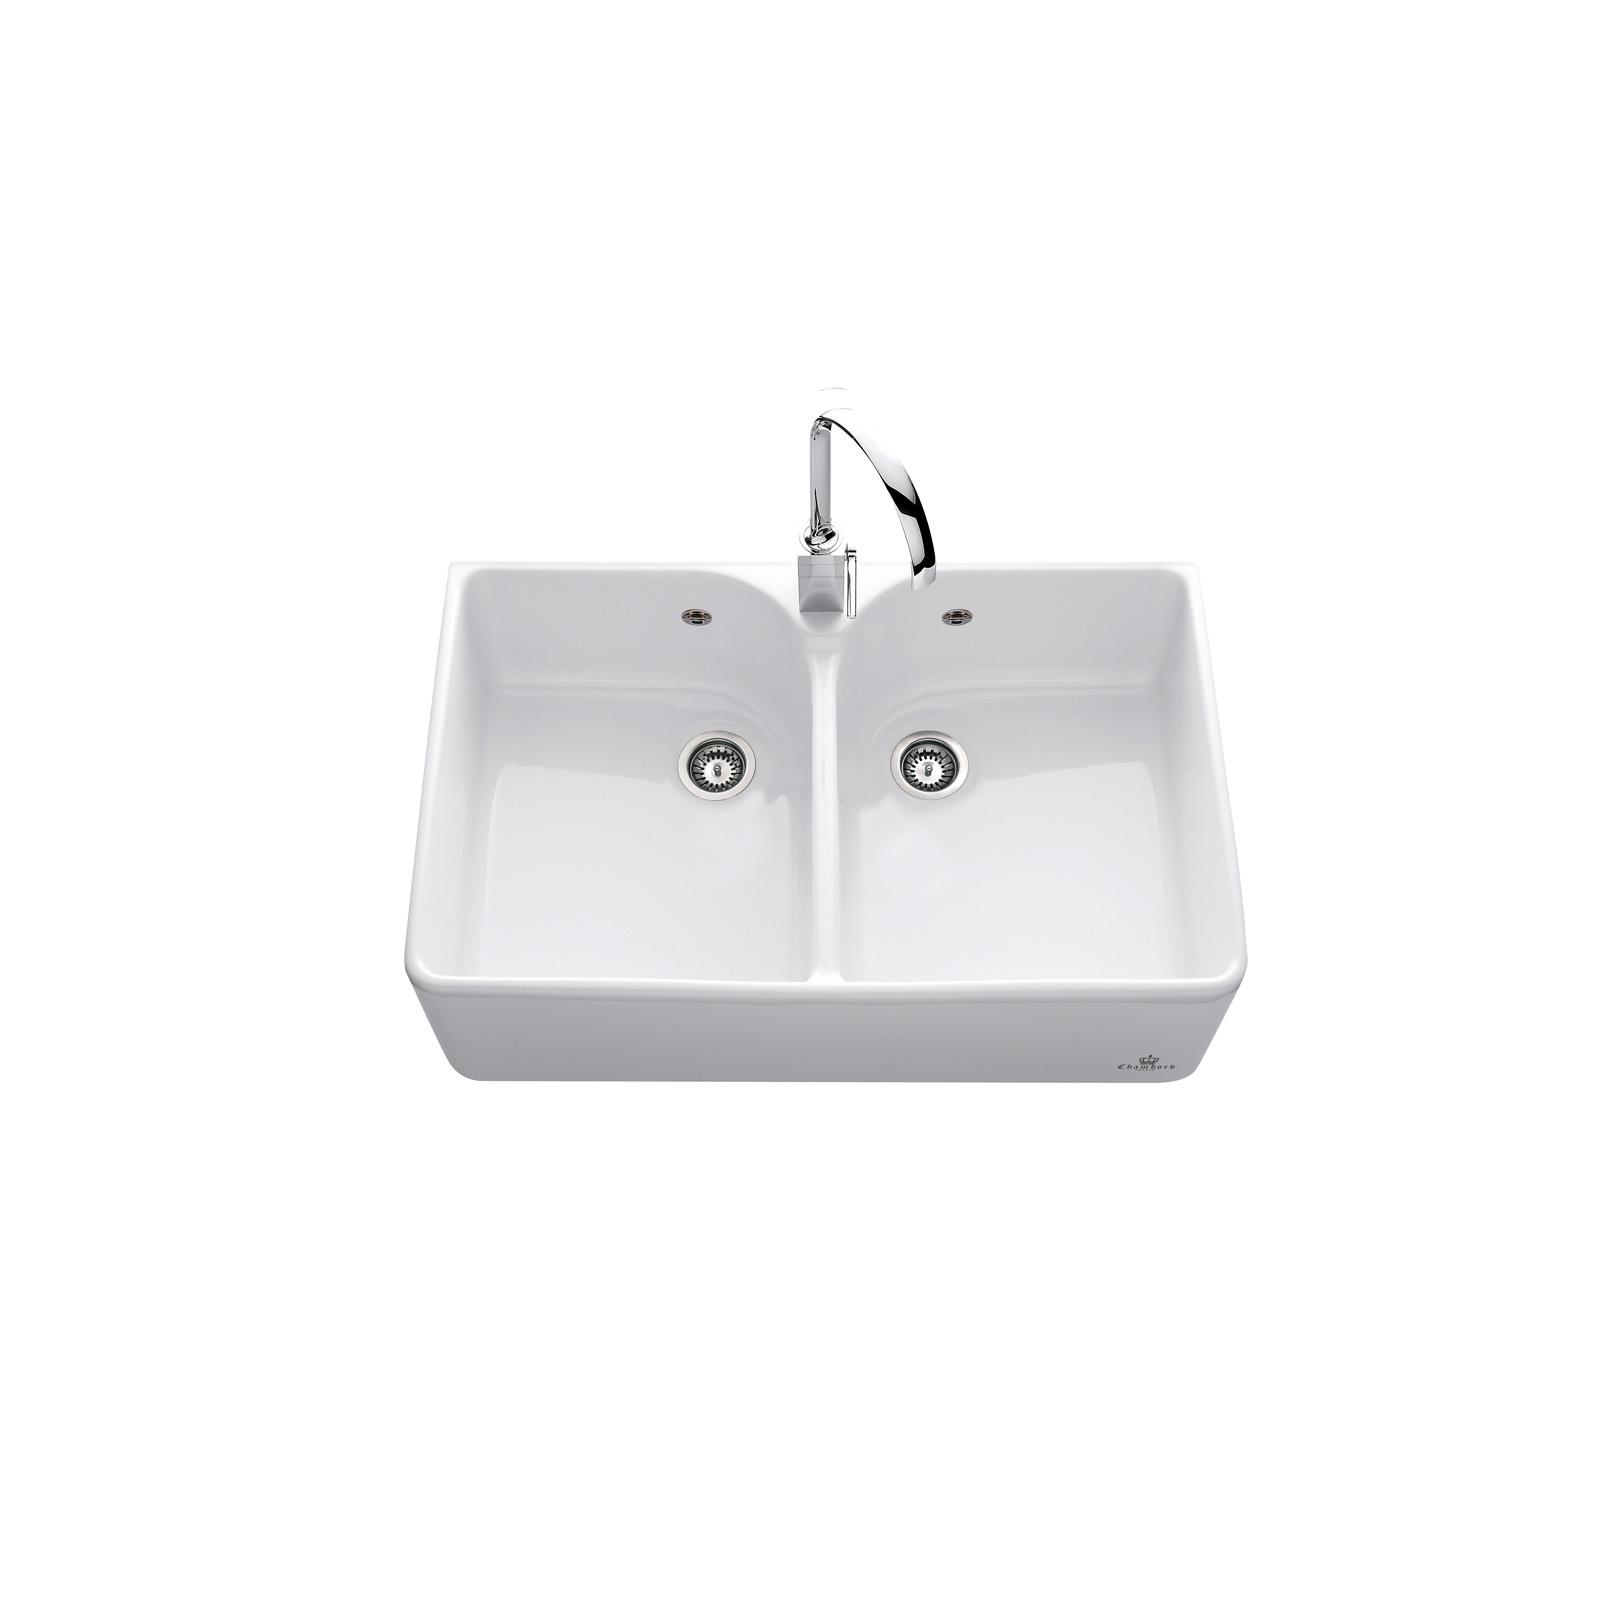 High-quality sink Clotaire II - two bowls, ceramic